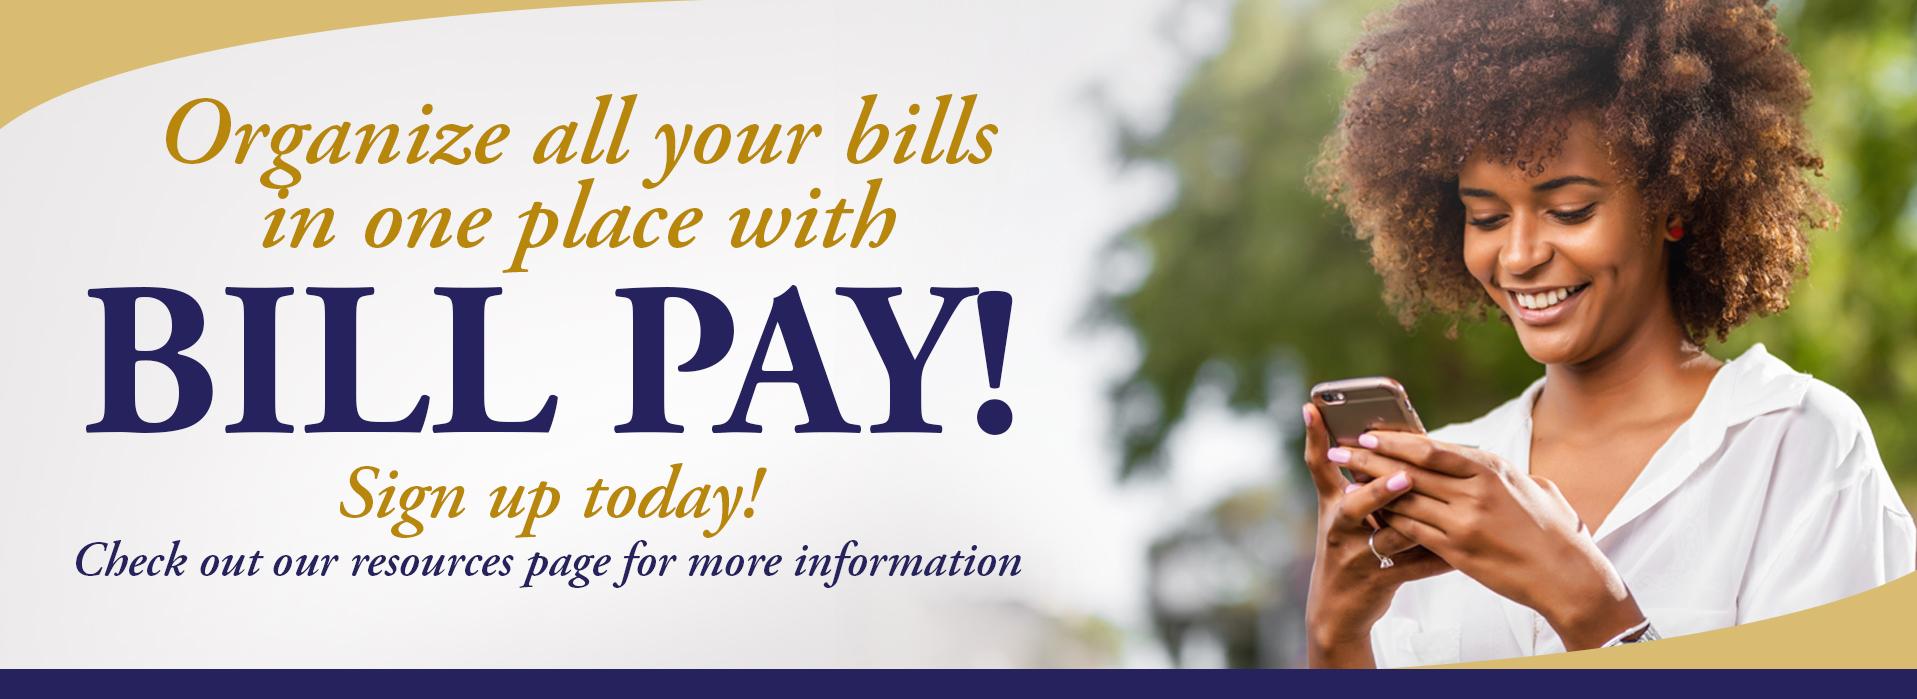 Organize all your bills in one place with Bill Pay!  Sign up today!  Check out our resources page for more information.  Image of a woman on her cell phone.